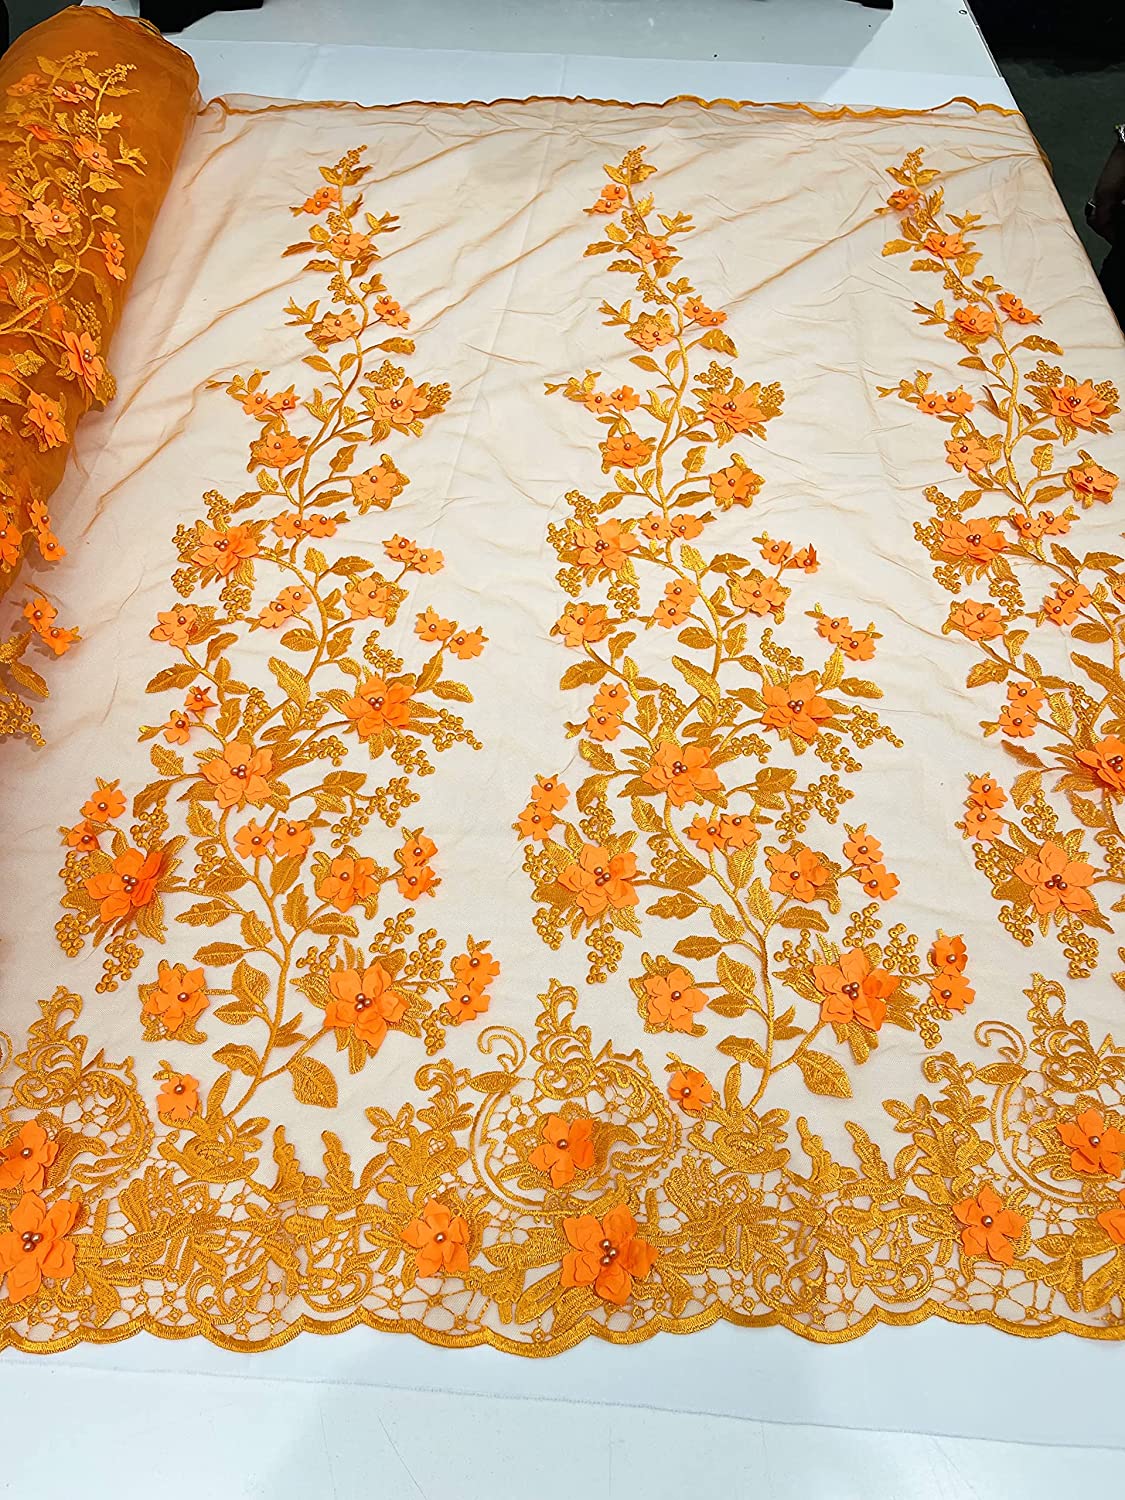 Emily 3-D Floral Design Embroider with Pearls On A Mesh Lace Fabric (1 Yard, Bright Orange)